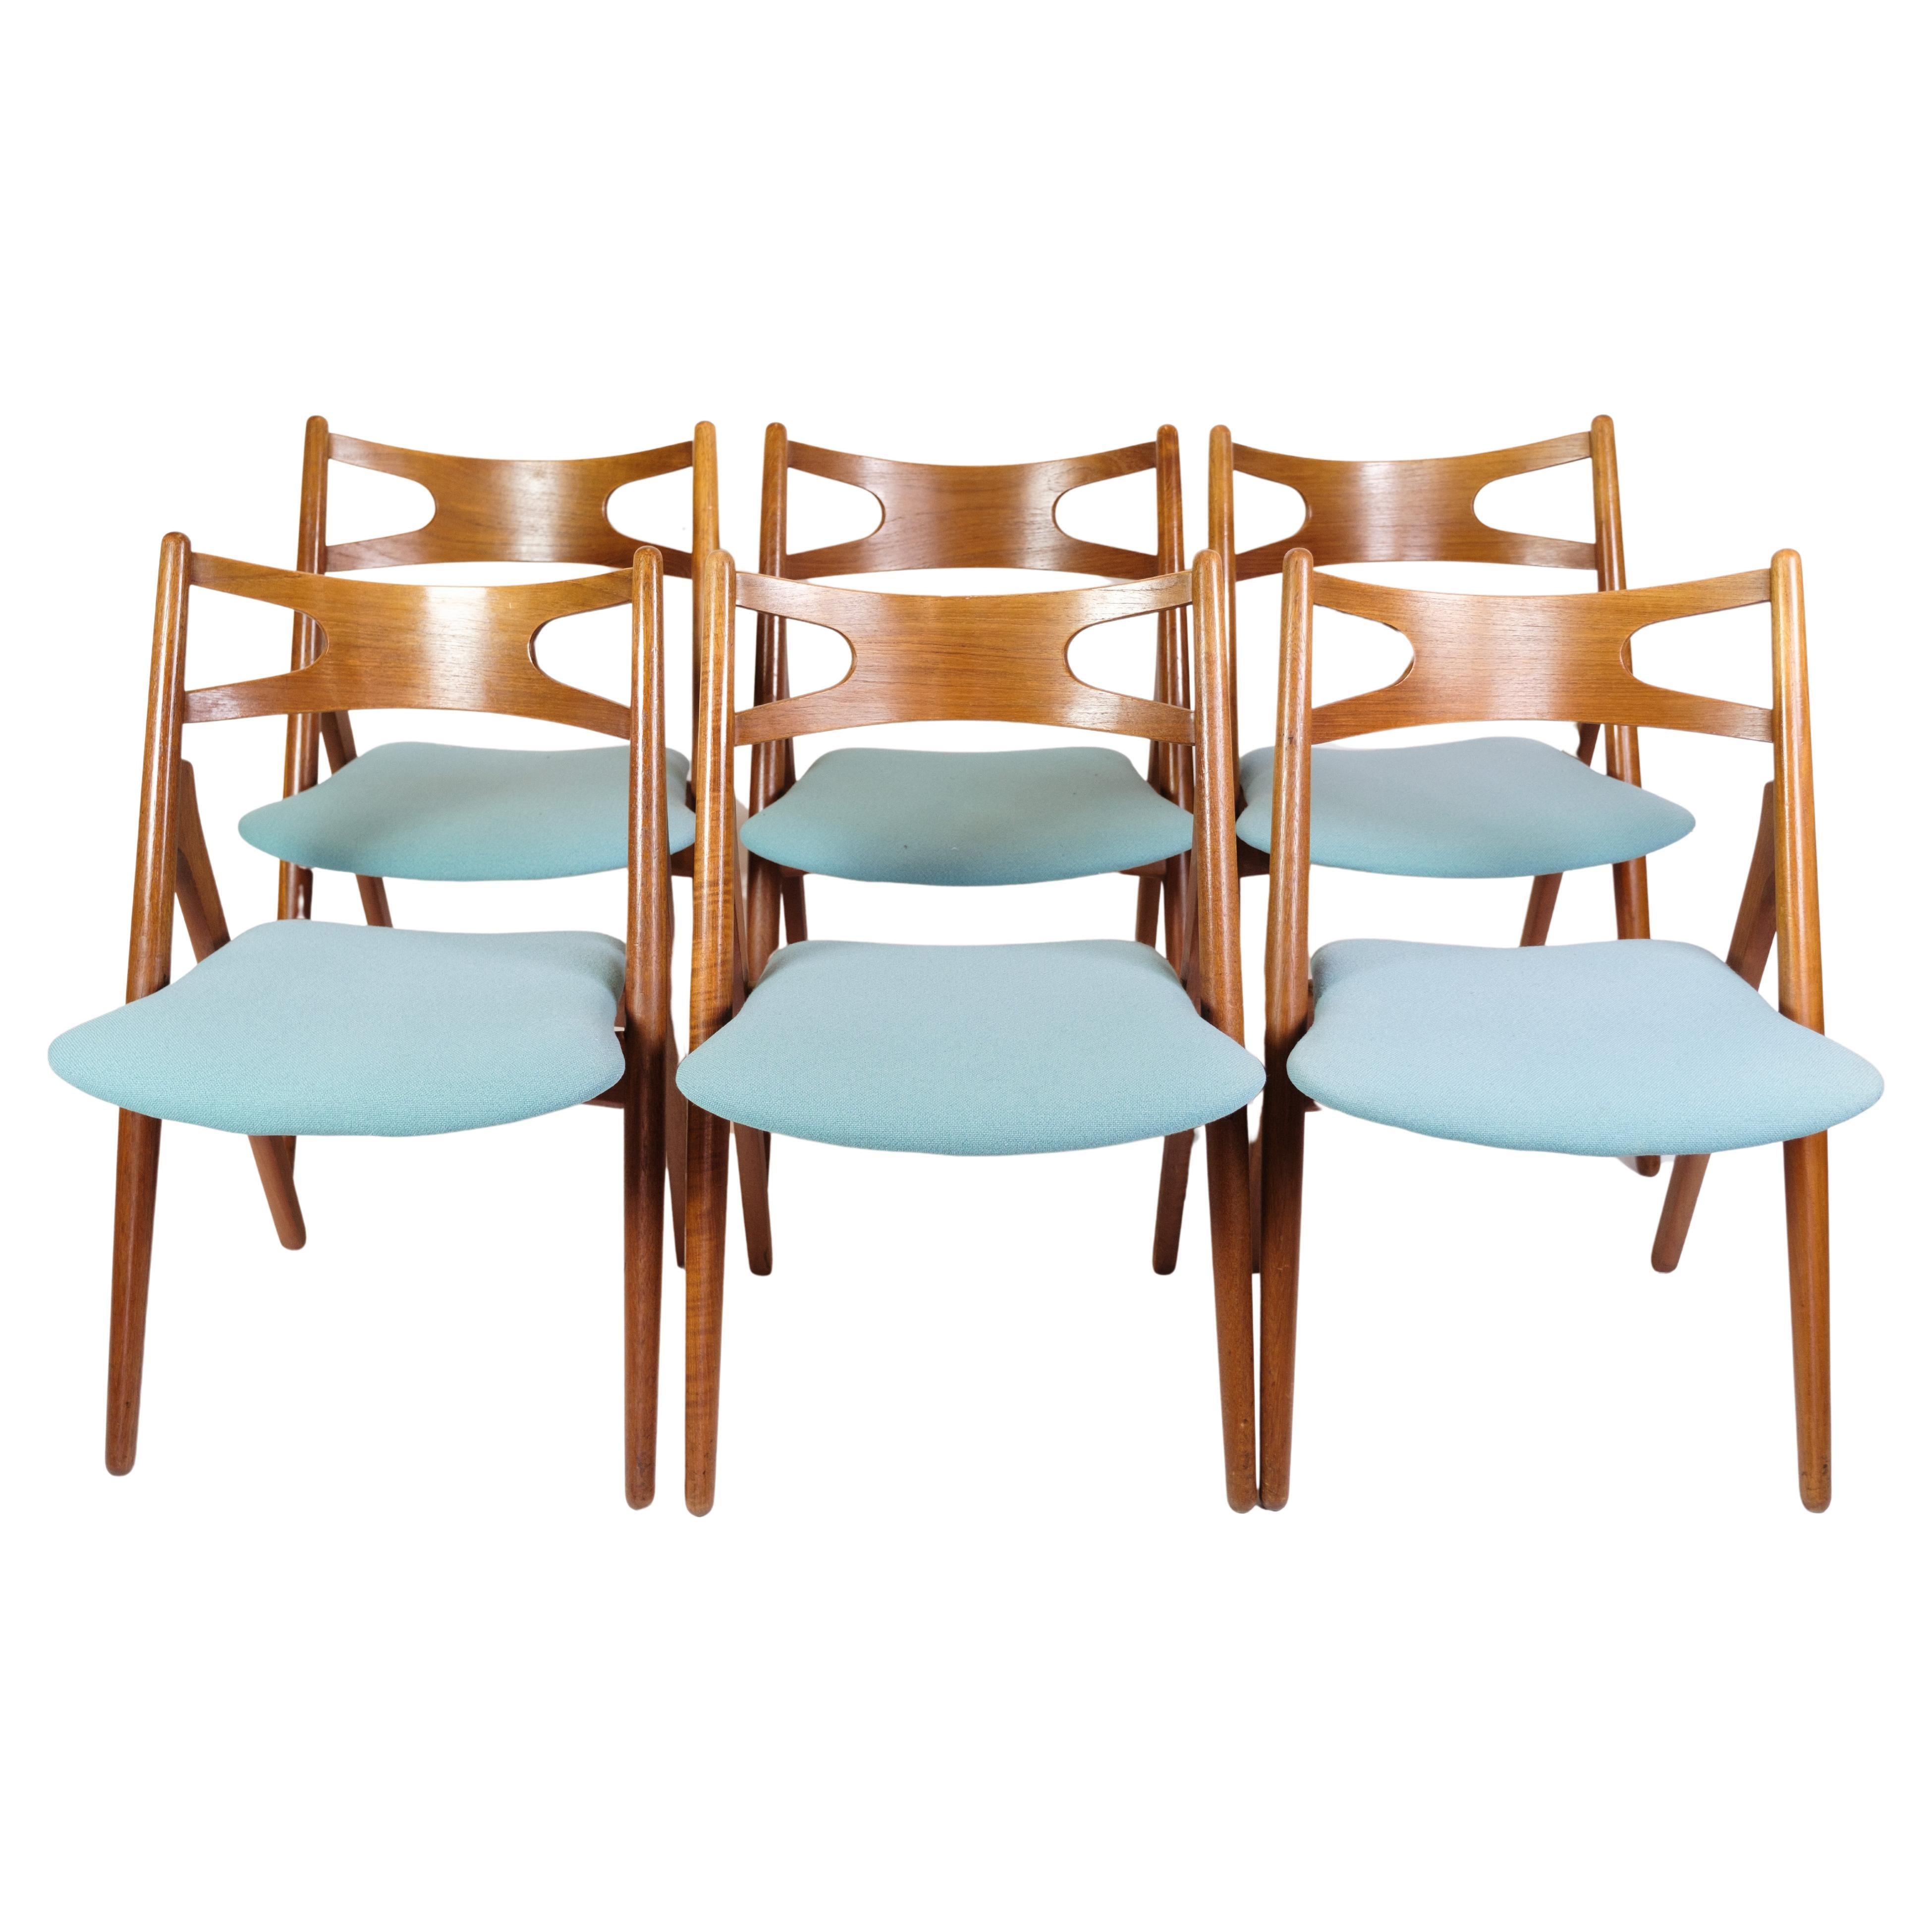 Set Of 6 Dining Chairs Model CH29P Made In Teak By Hans J. Wegner From 1950s